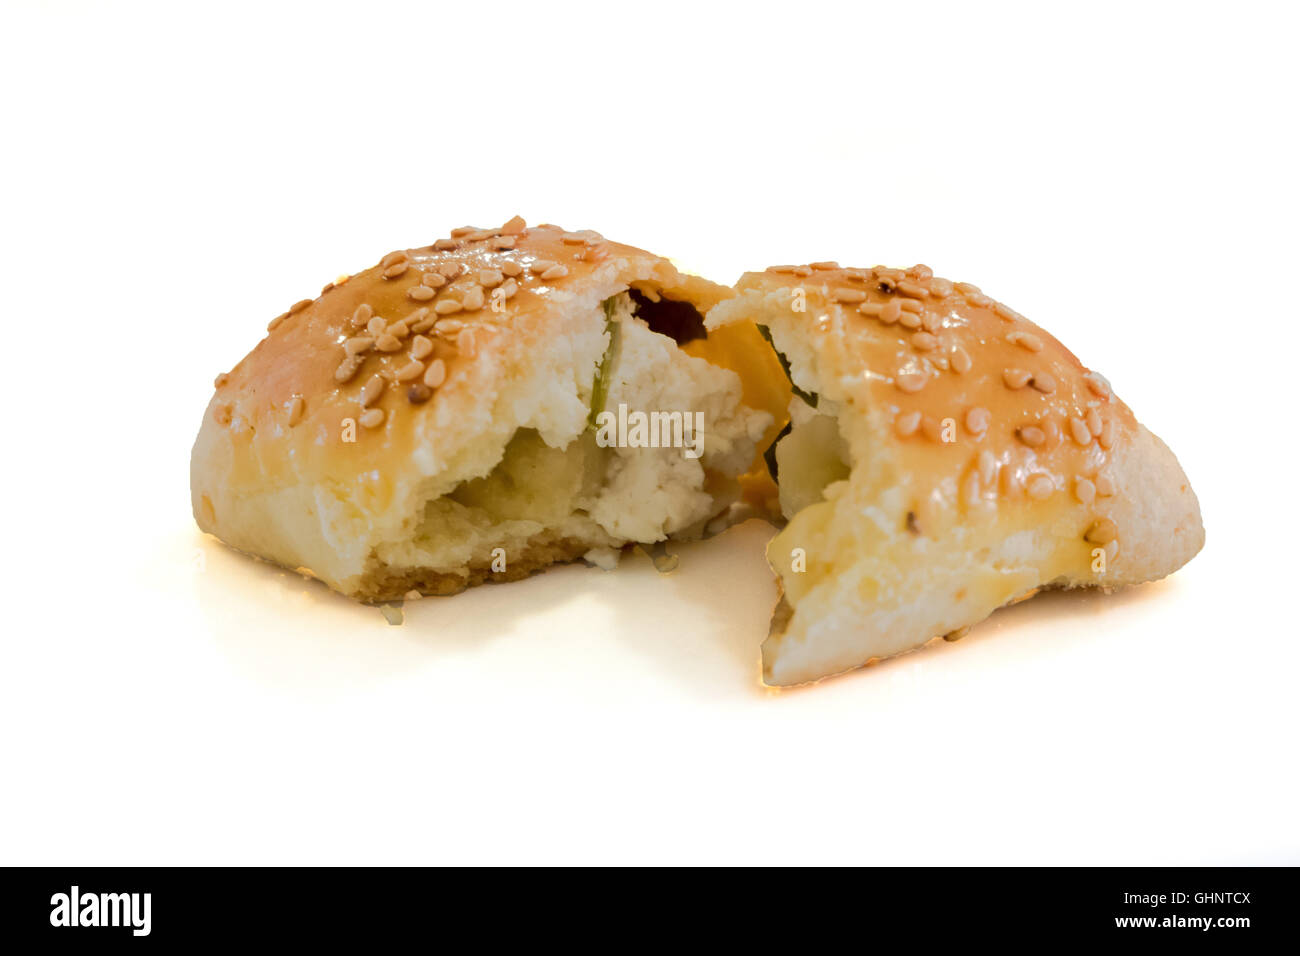 Turkish recipe: Mini bun pastry with cheese filling on white background Stock Photo